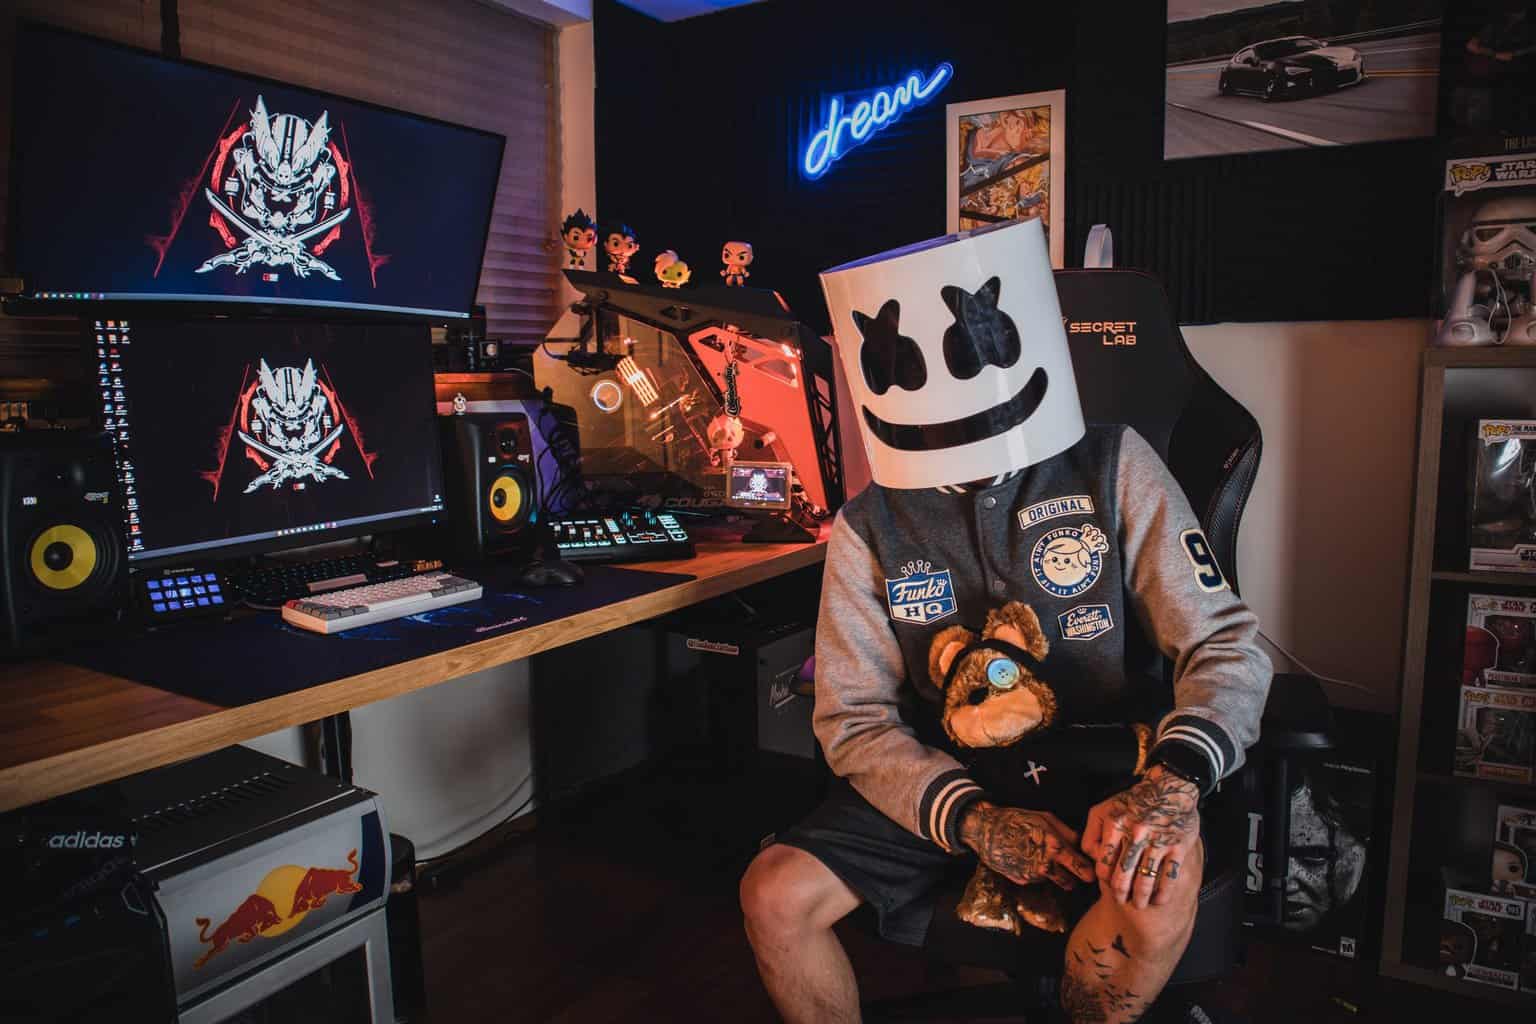 Who Is Marshmello? An In-Depth Look At Who Is Behind The Mask